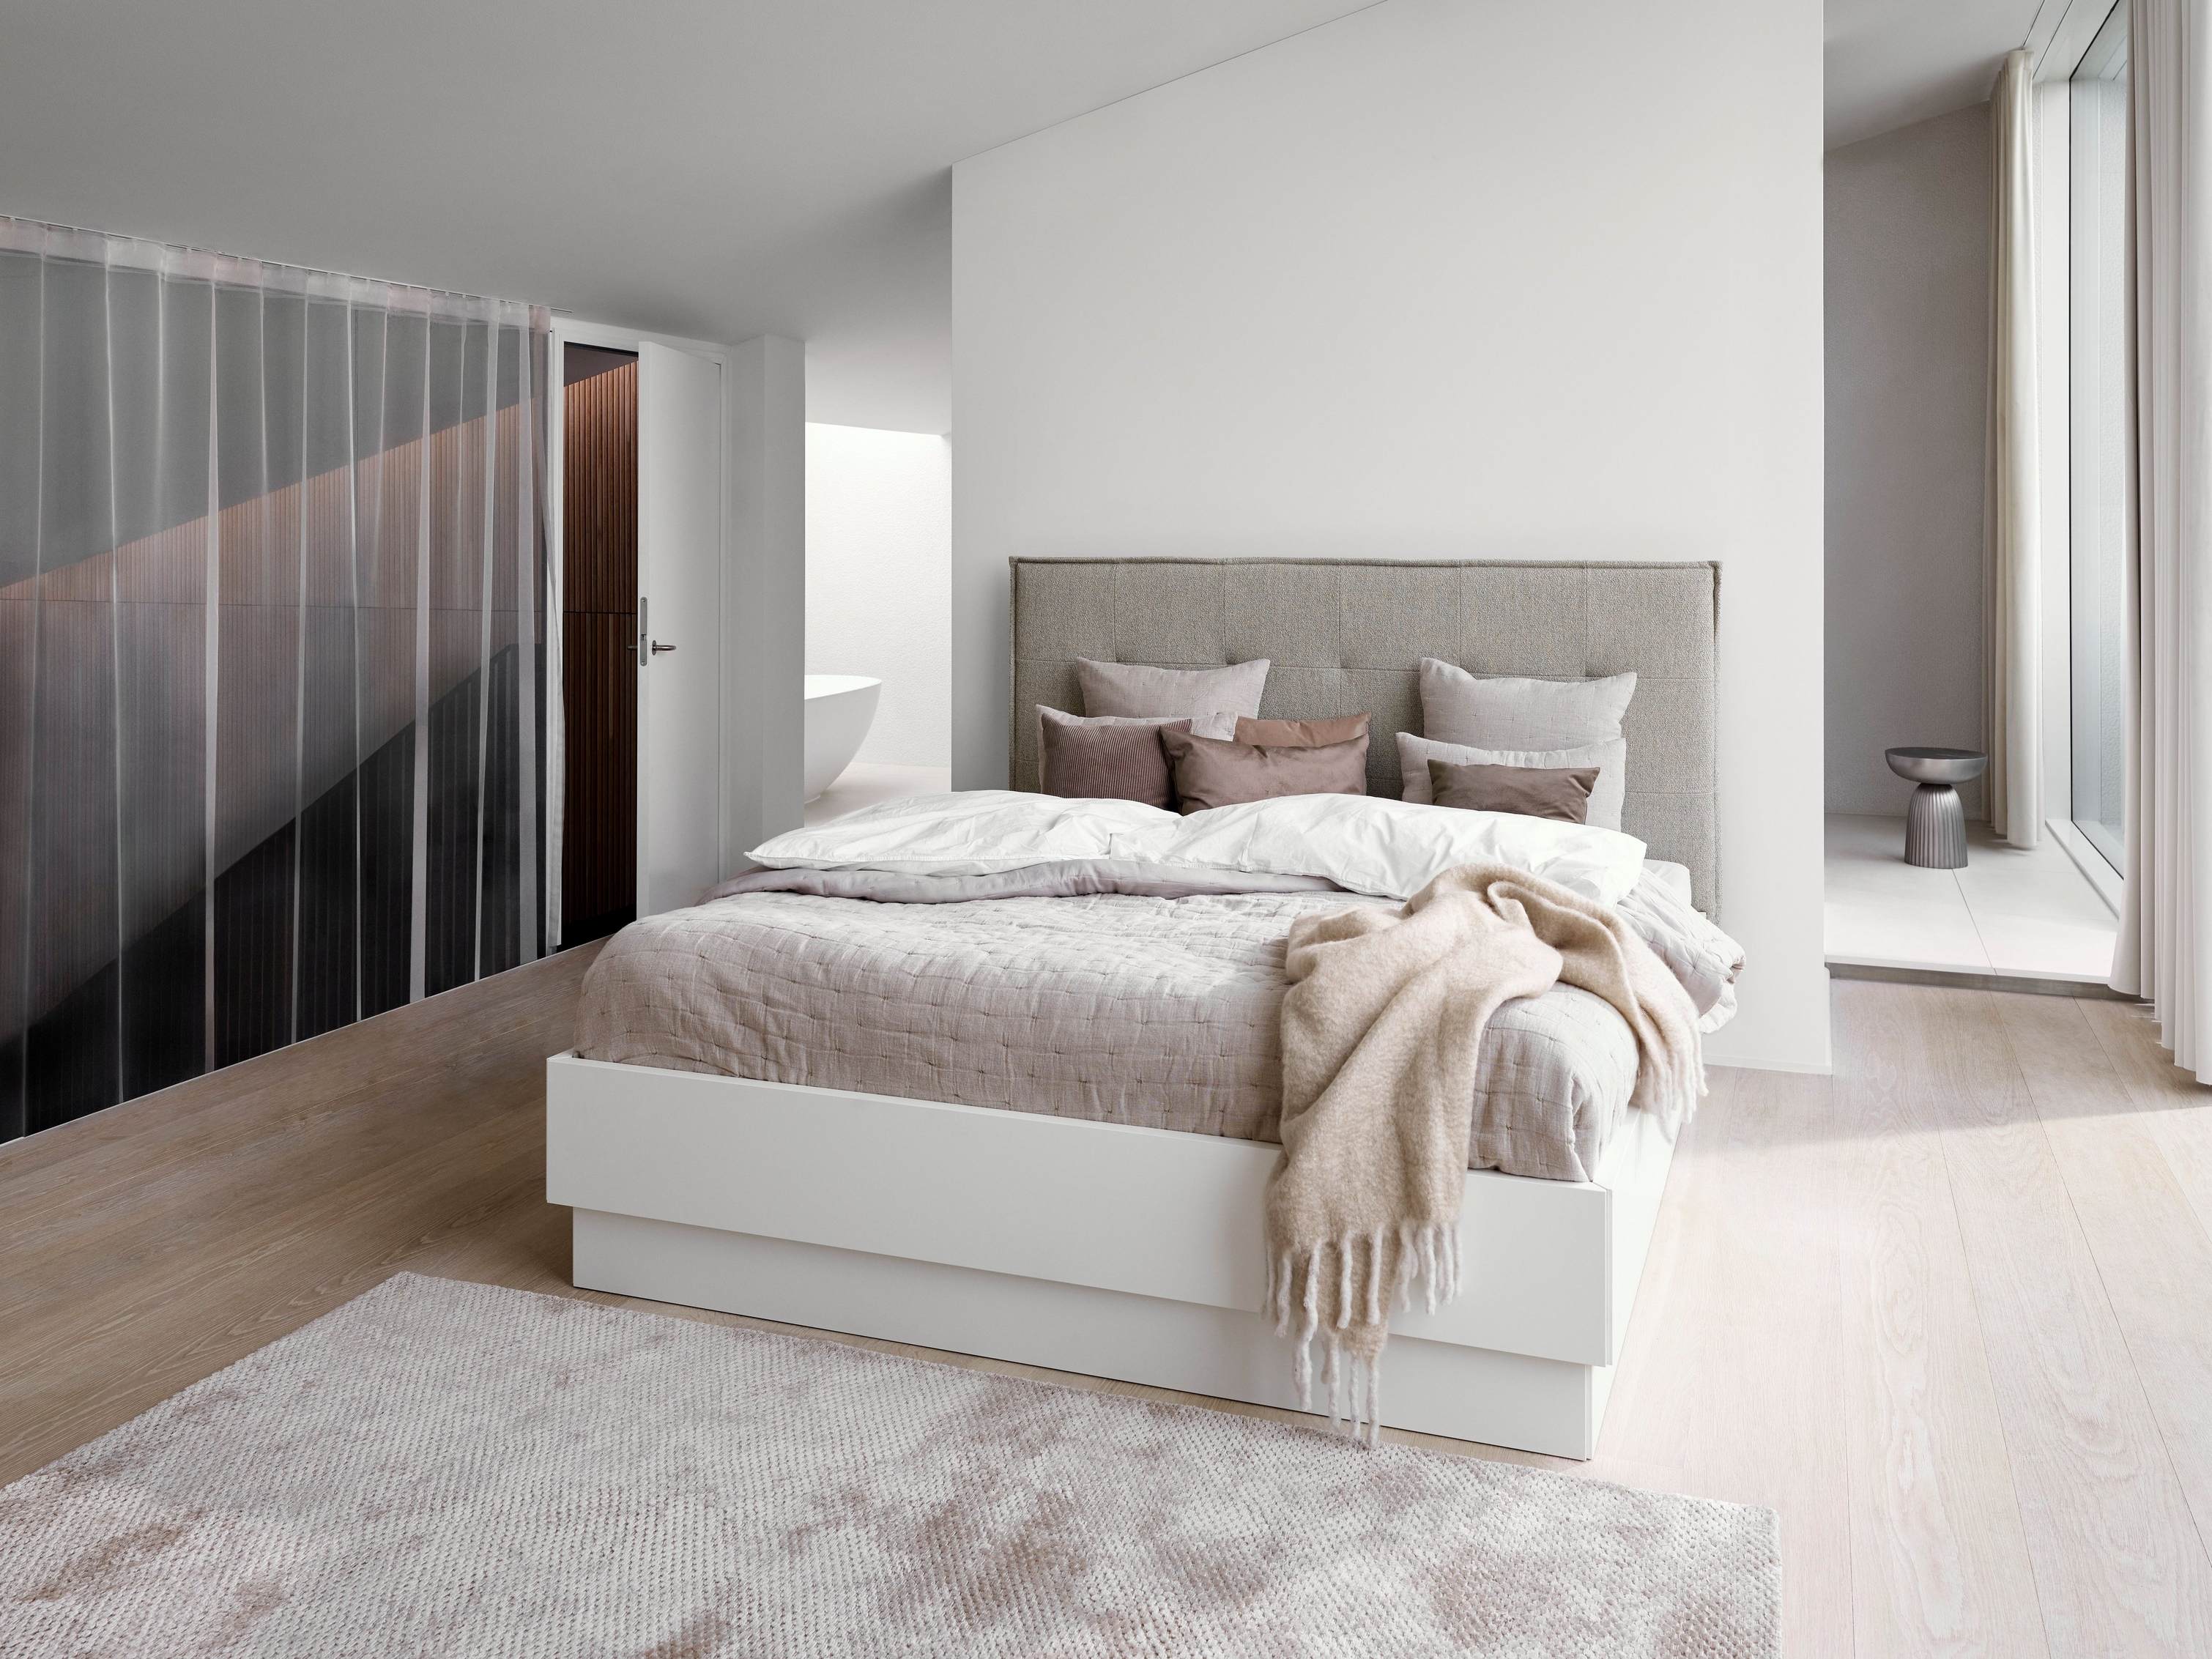 Minimalist bedroom with a grey upholstered bed, white linens, and a textured beige throw.